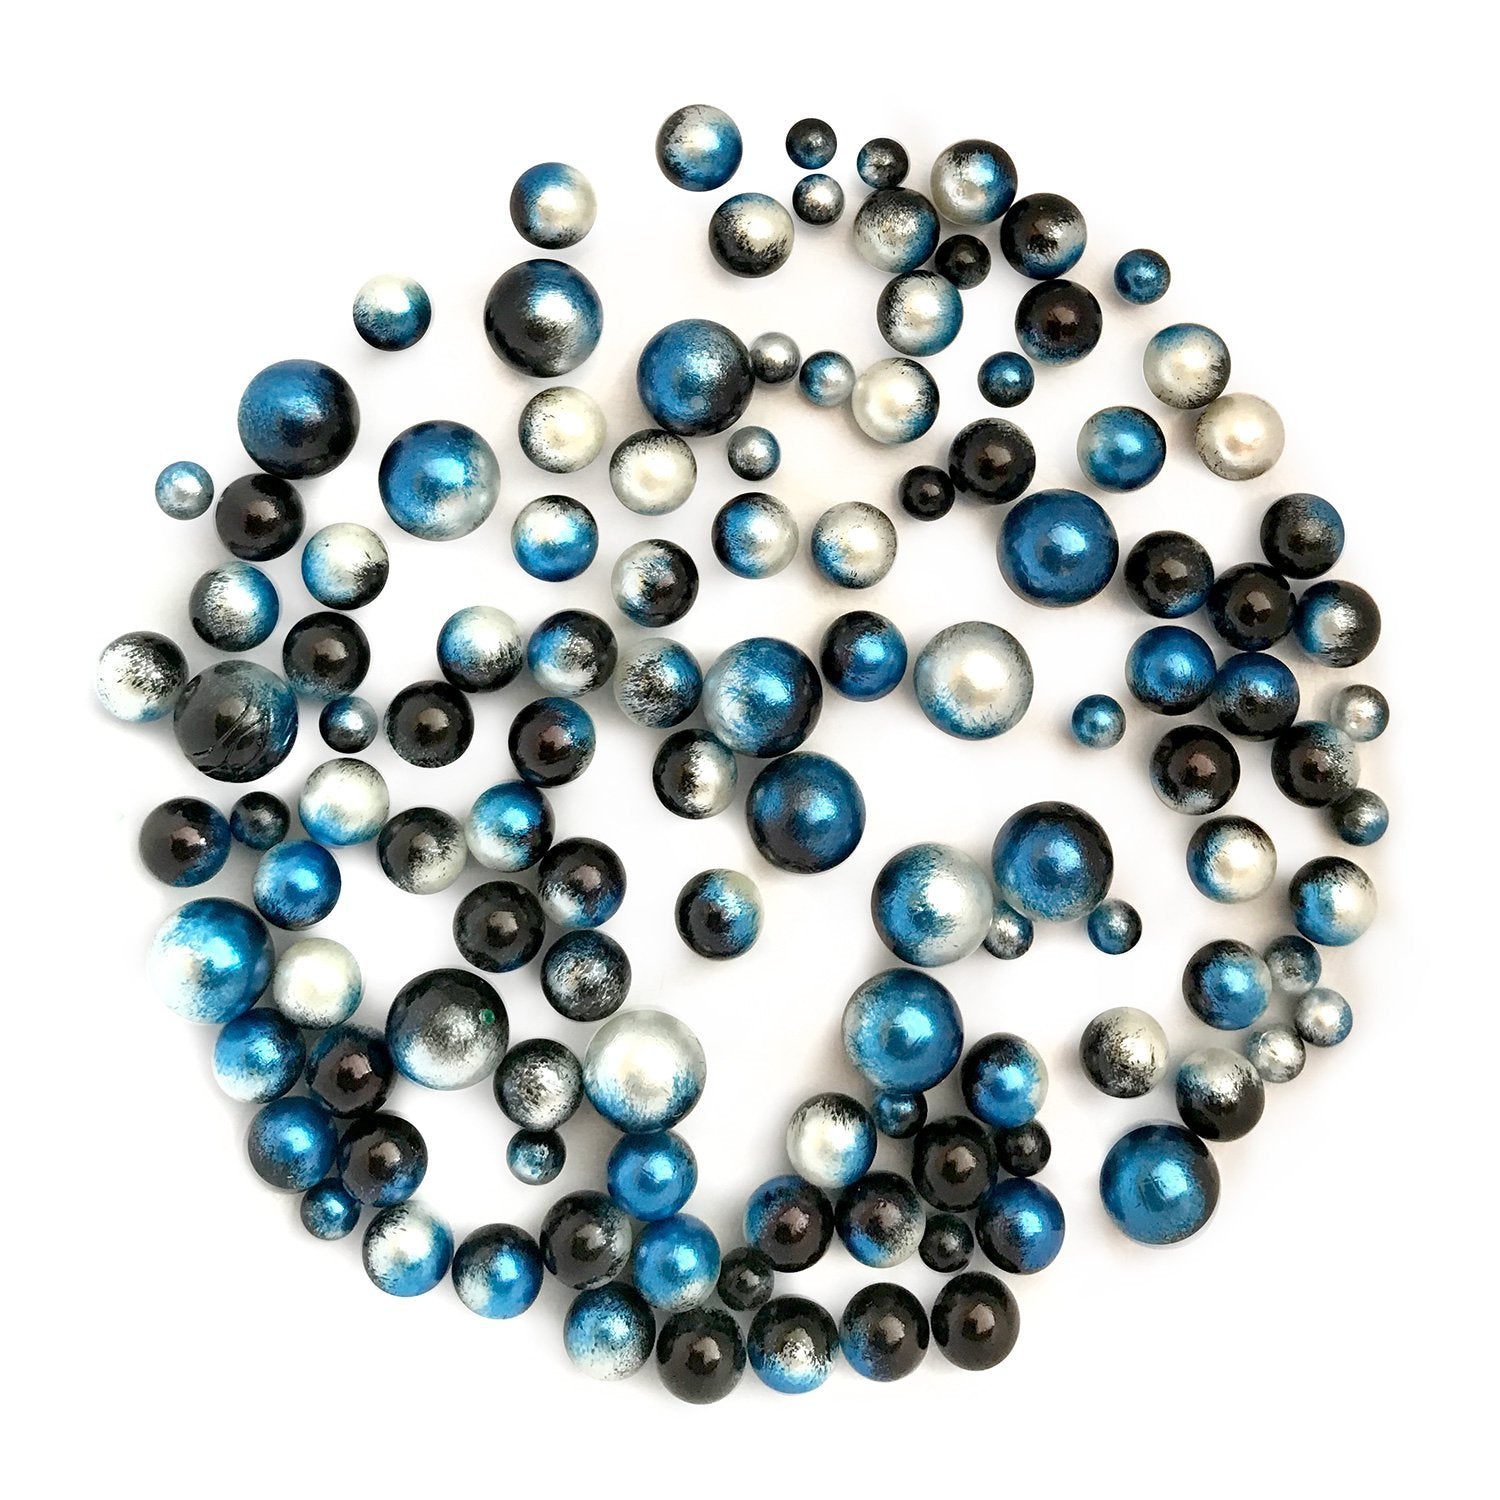 100pcs Pearls Rhinestones Buttons Wholesale WBR-032 – Bouquets by Nicole